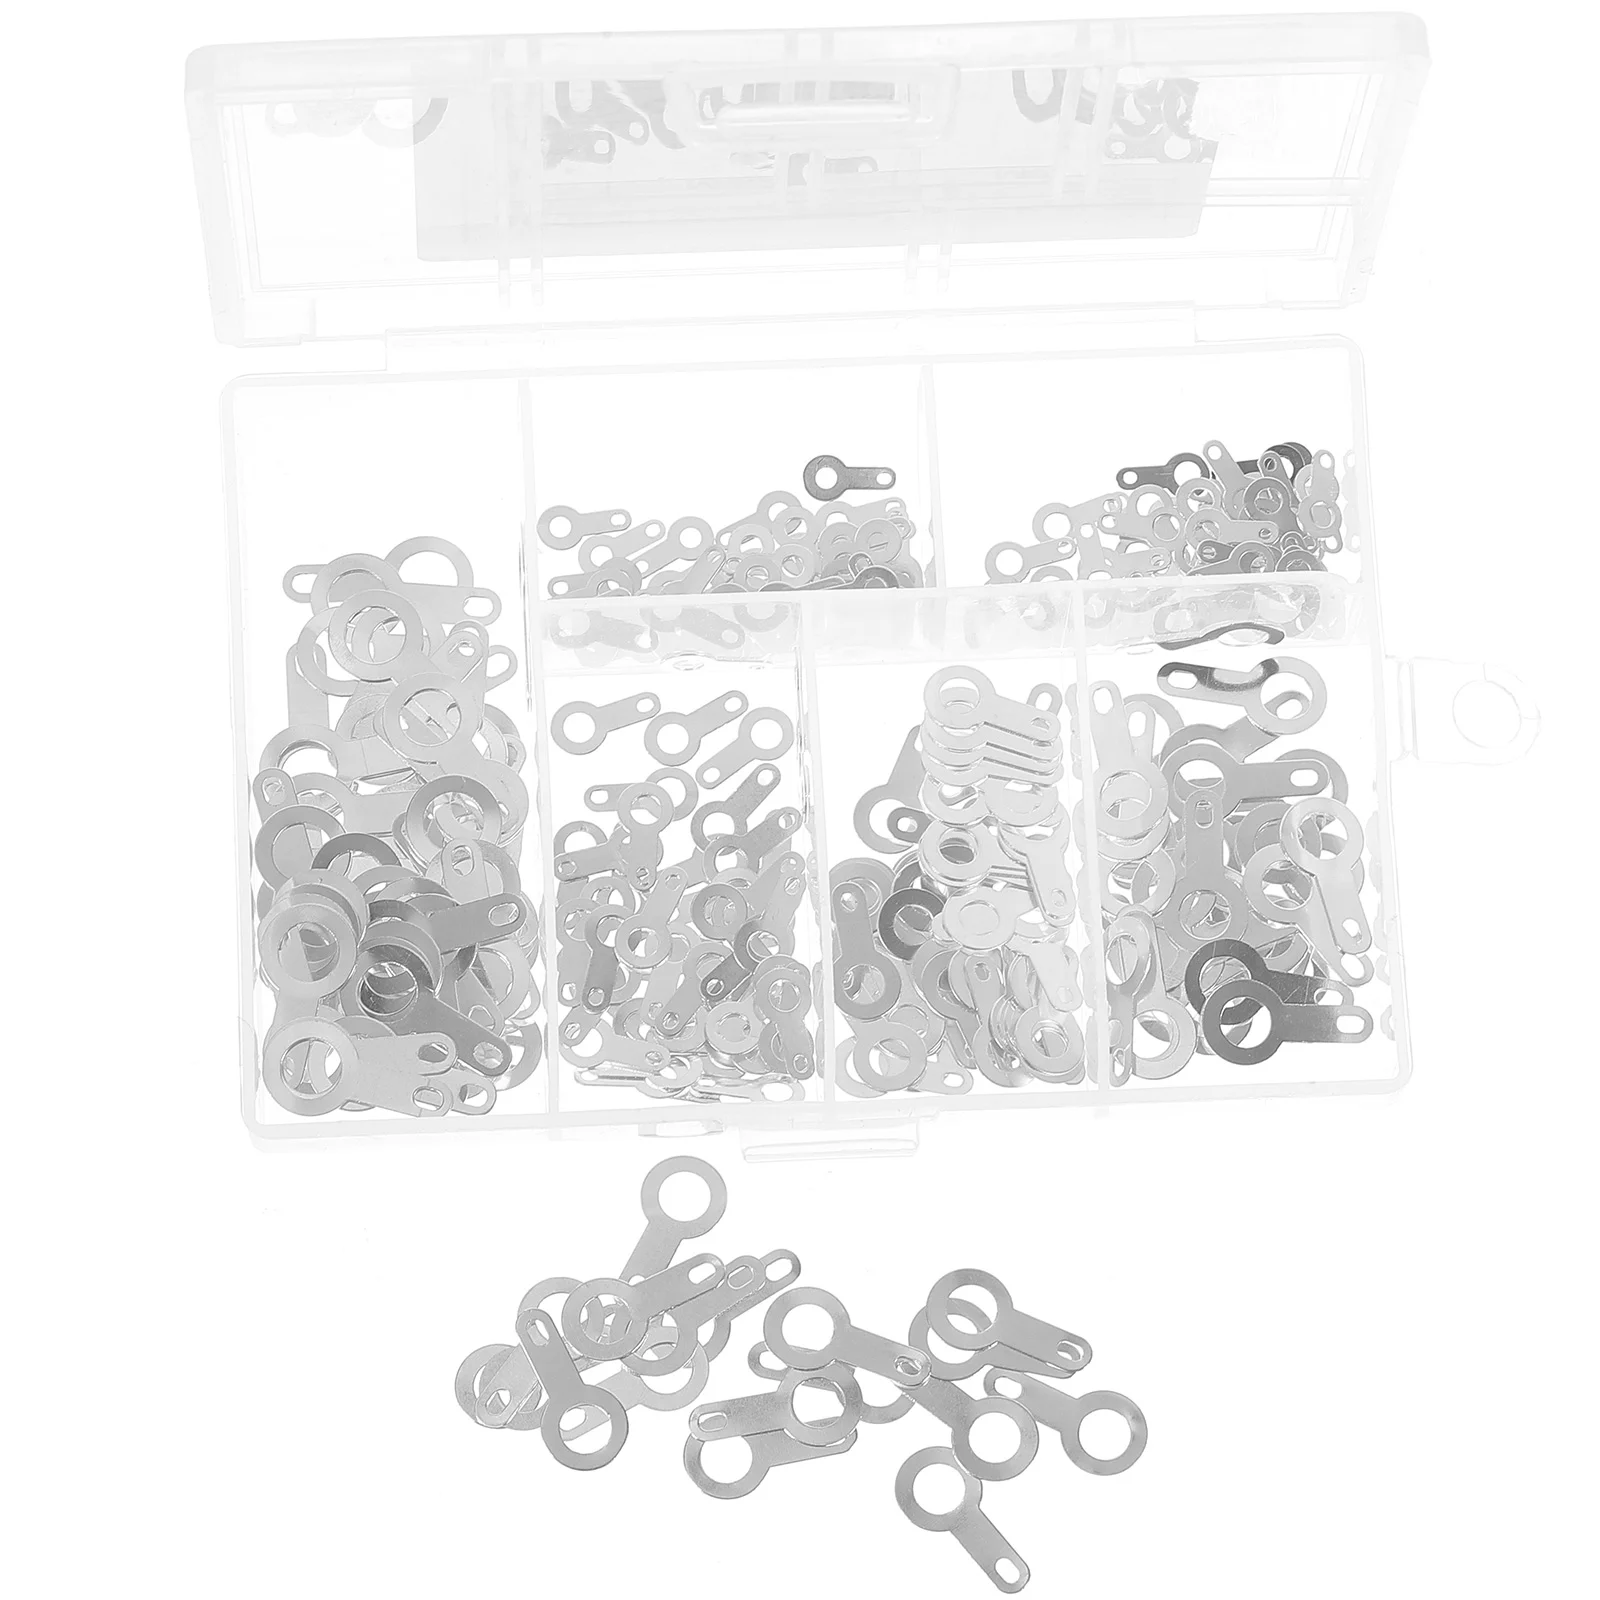 

300pcs Single-head Solder Lug Soldering Para Cables Electricos Stainless Steel Washers